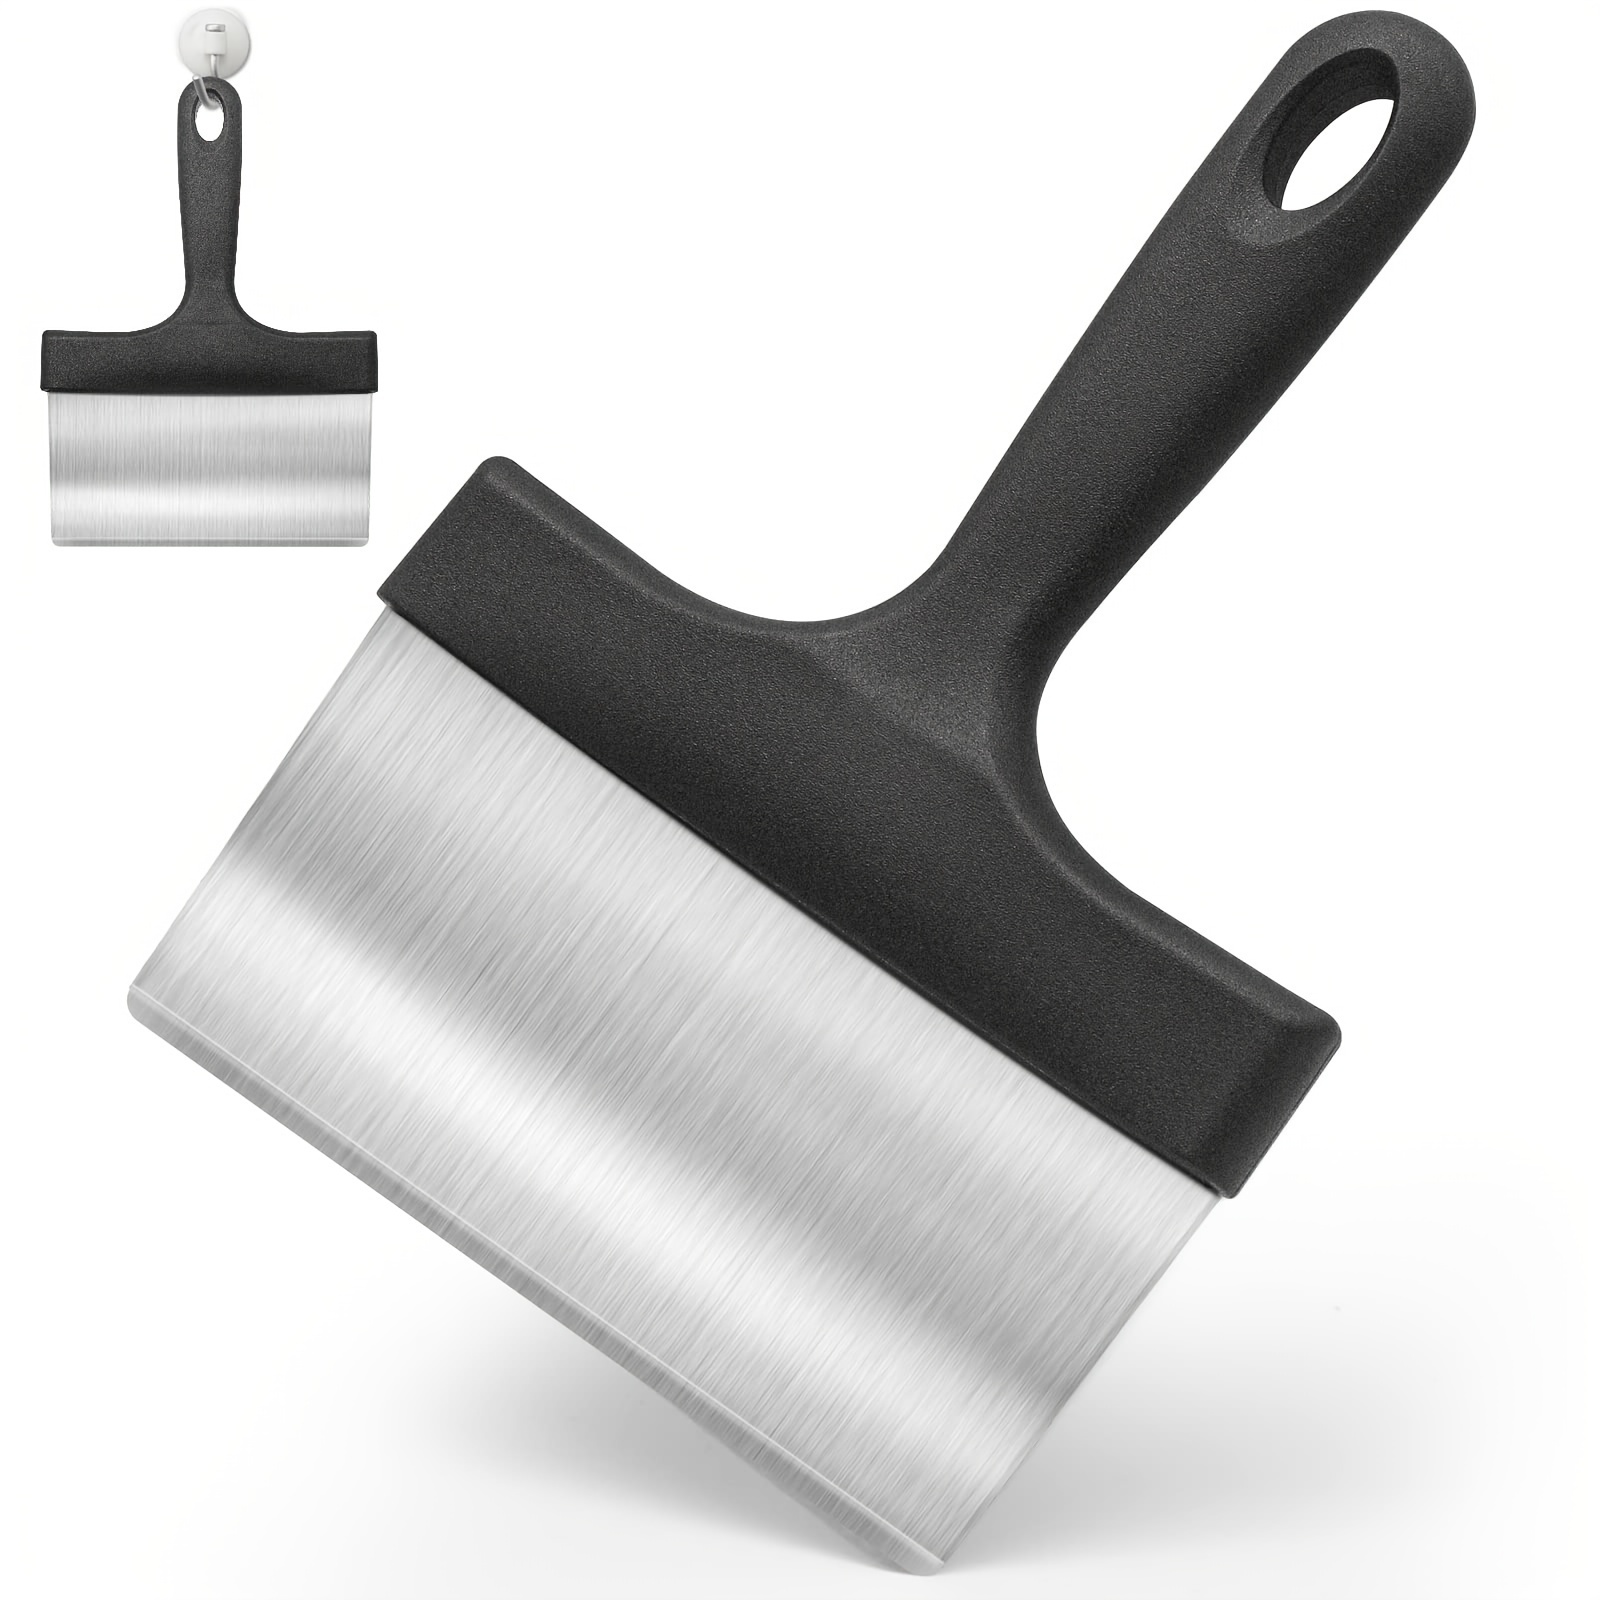 1pc Black Cleaning Tool For Kitchen, Including Kitchen Scraper